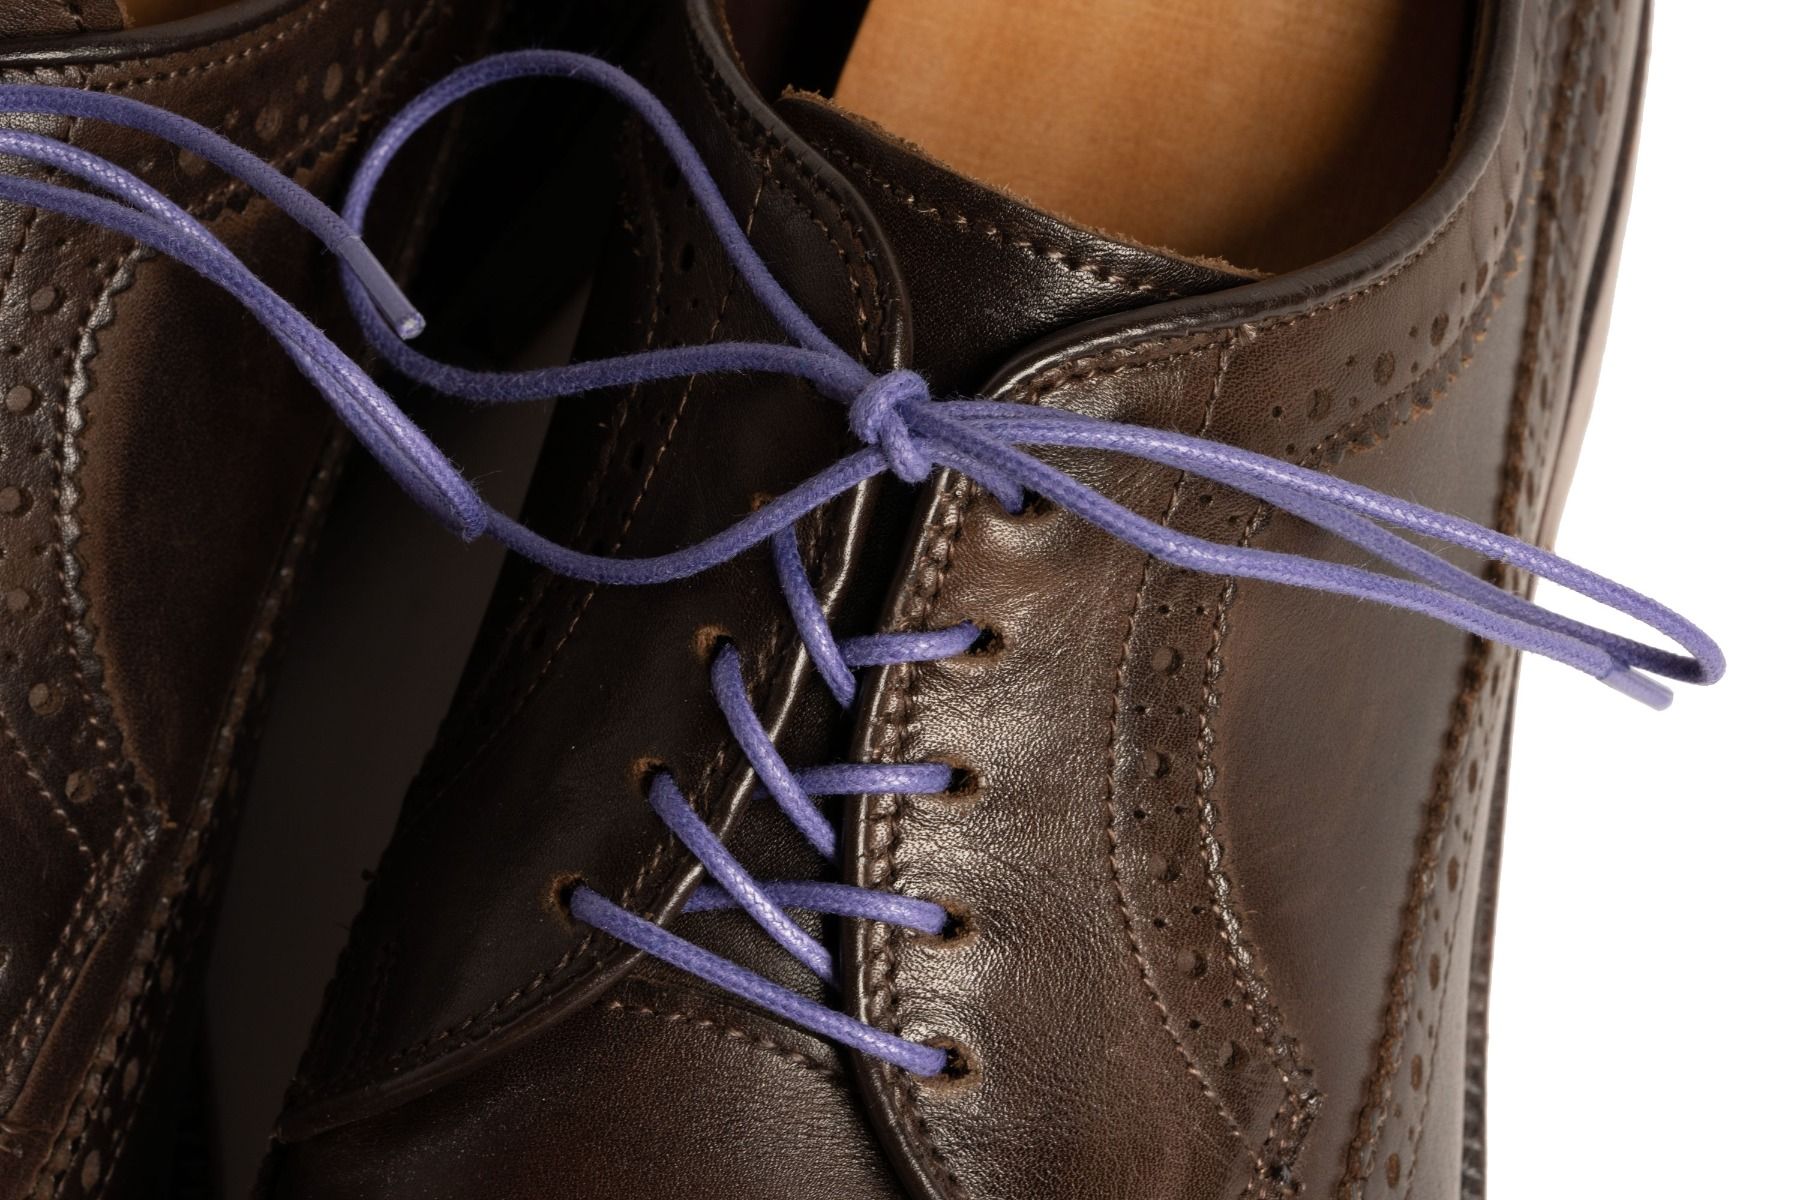 Black Shoelaces Round - Waxed Cotton Dress Shoe Laces Luxury by Fort Belvedere